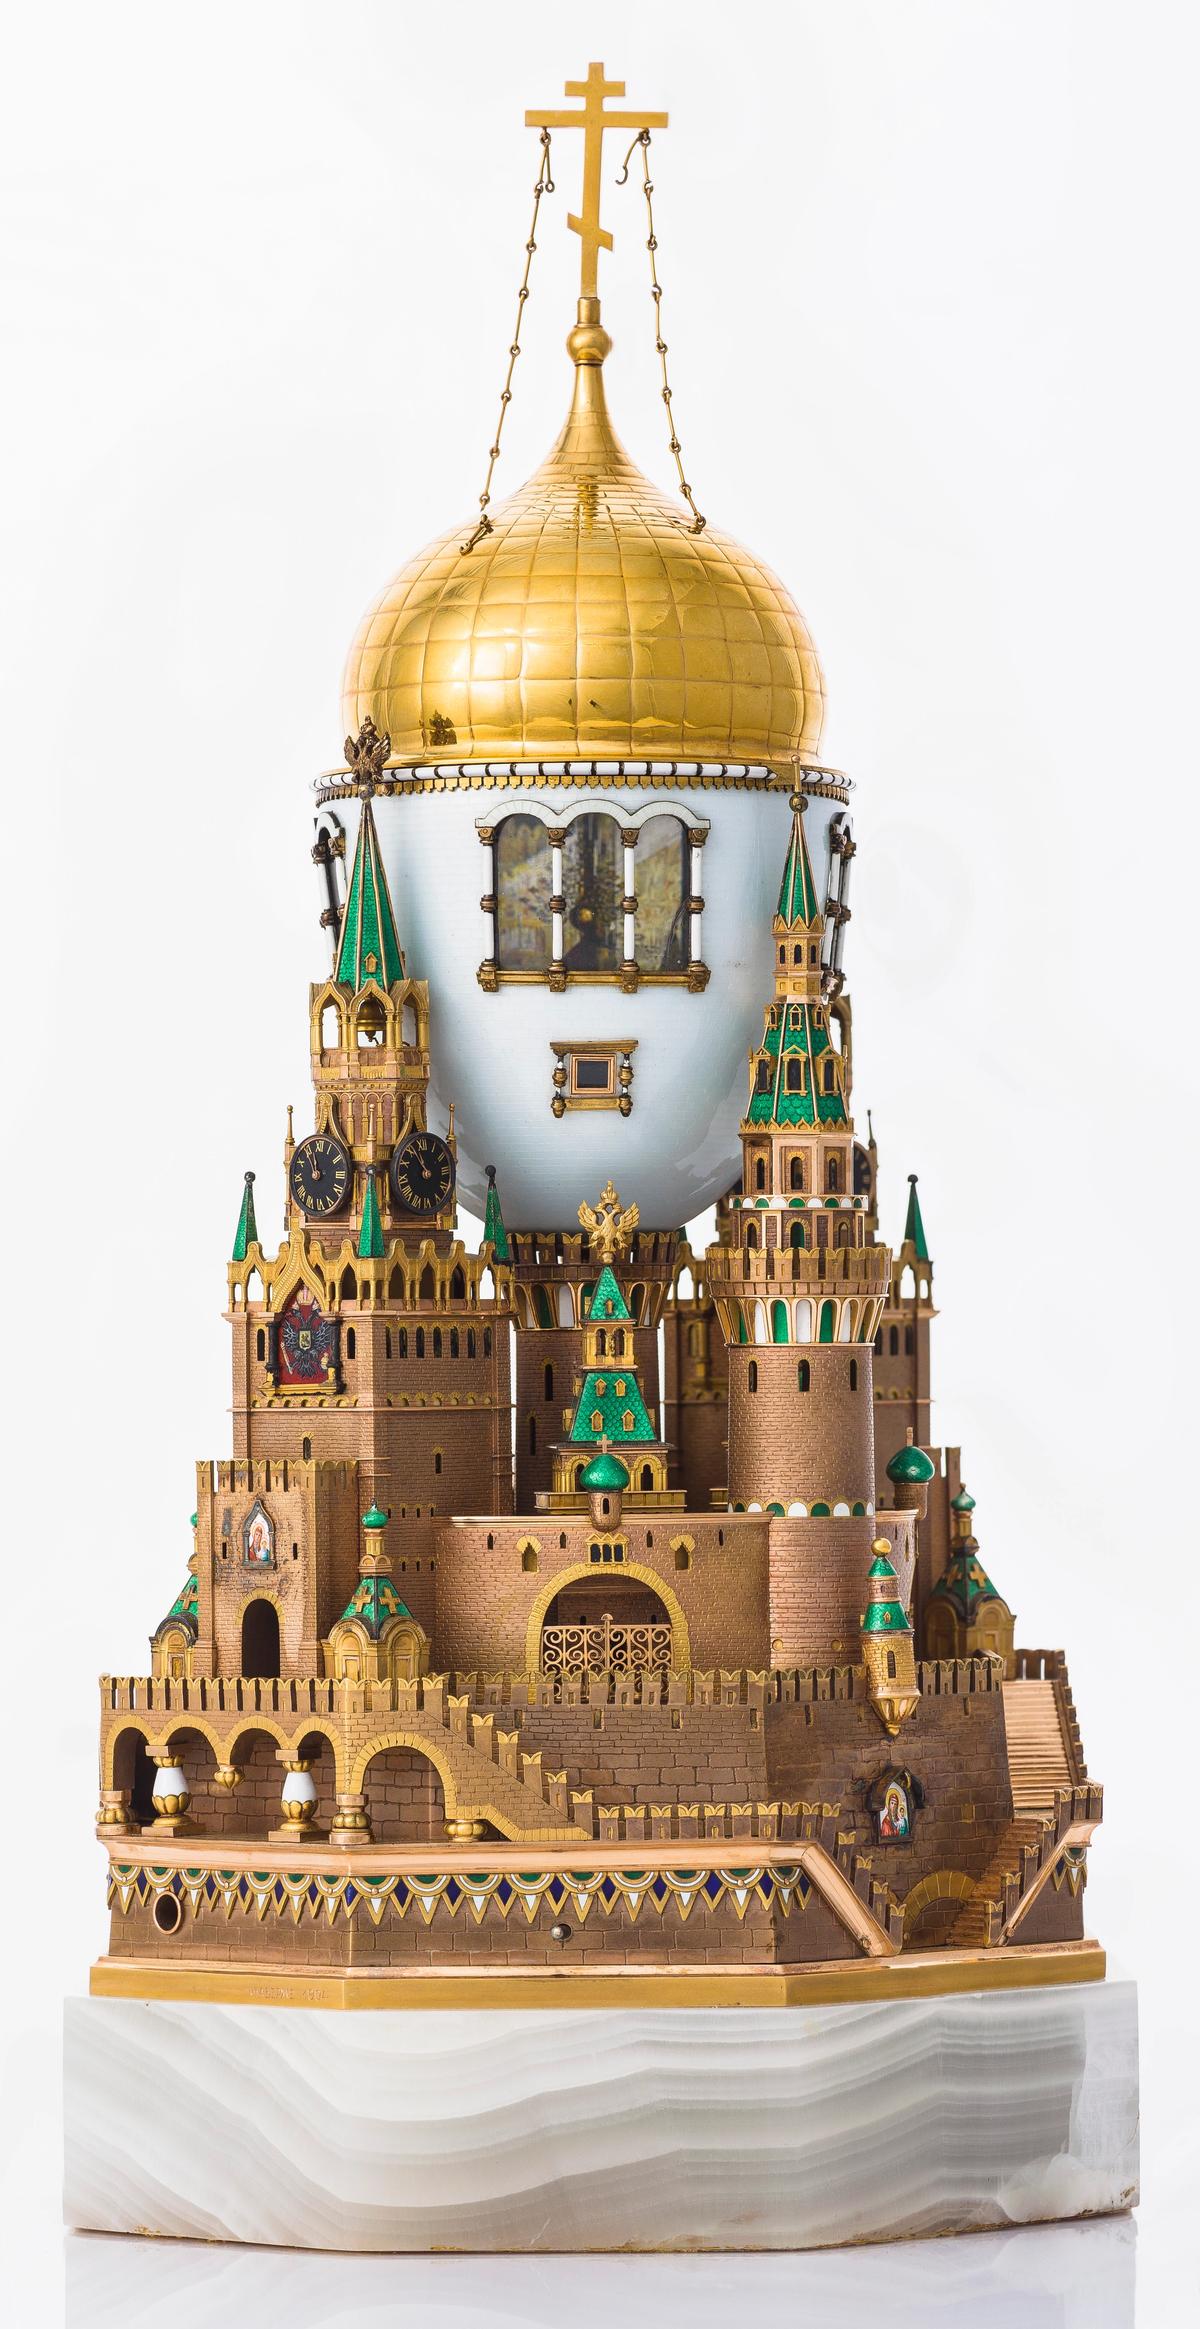 The Moscow Kremlin Egg (1906) is the largest Imperial egg made by Peter Carl Fabergé © The Moscow Kremlin Museums